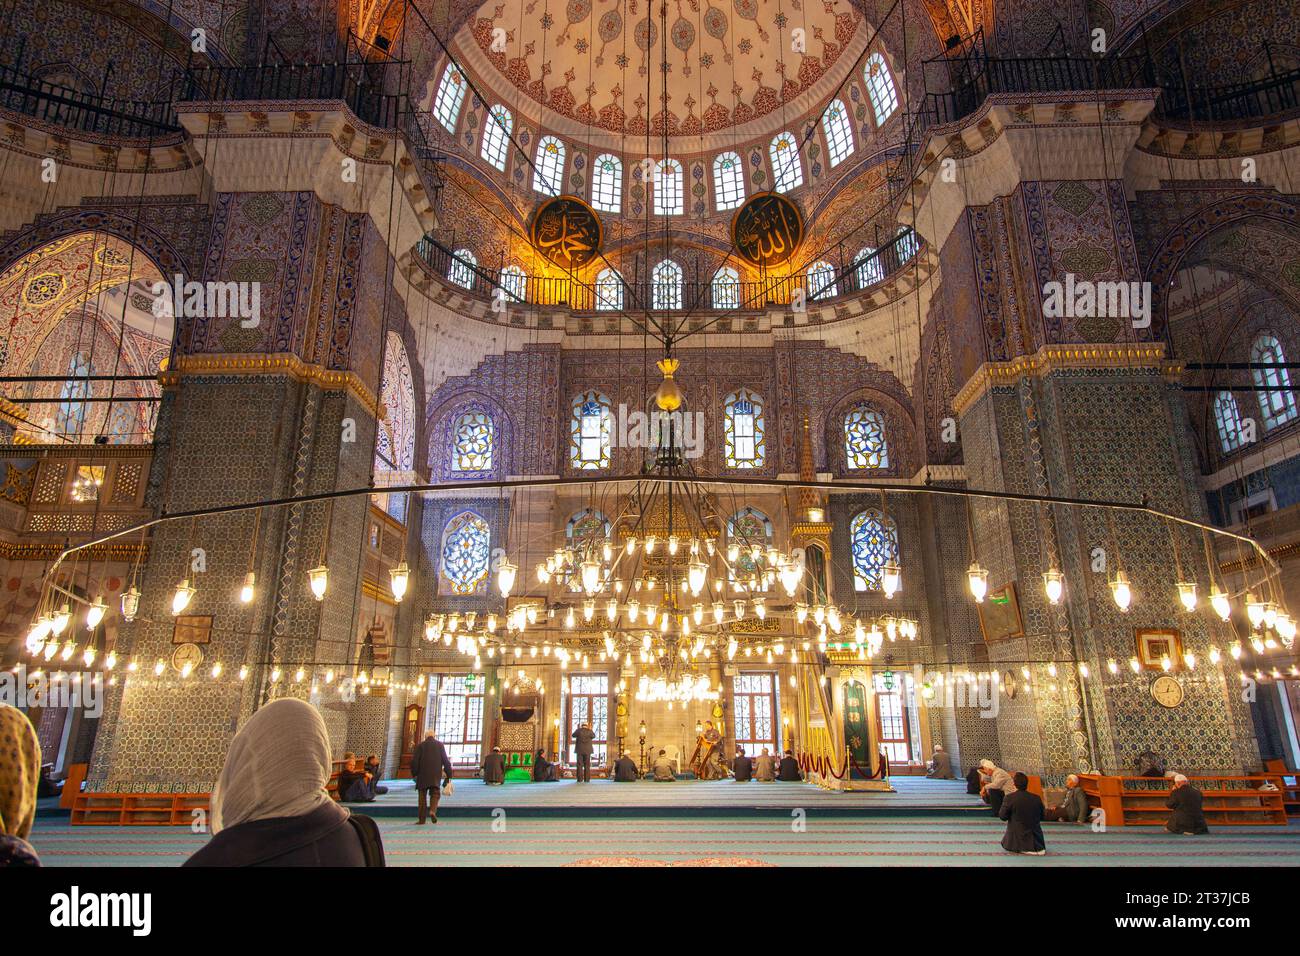 People praying inside the lit up 17th Century Blue Mosque, an Ottoman-era historical imperial mosque located in Istanbul, Turkey Stock Photo